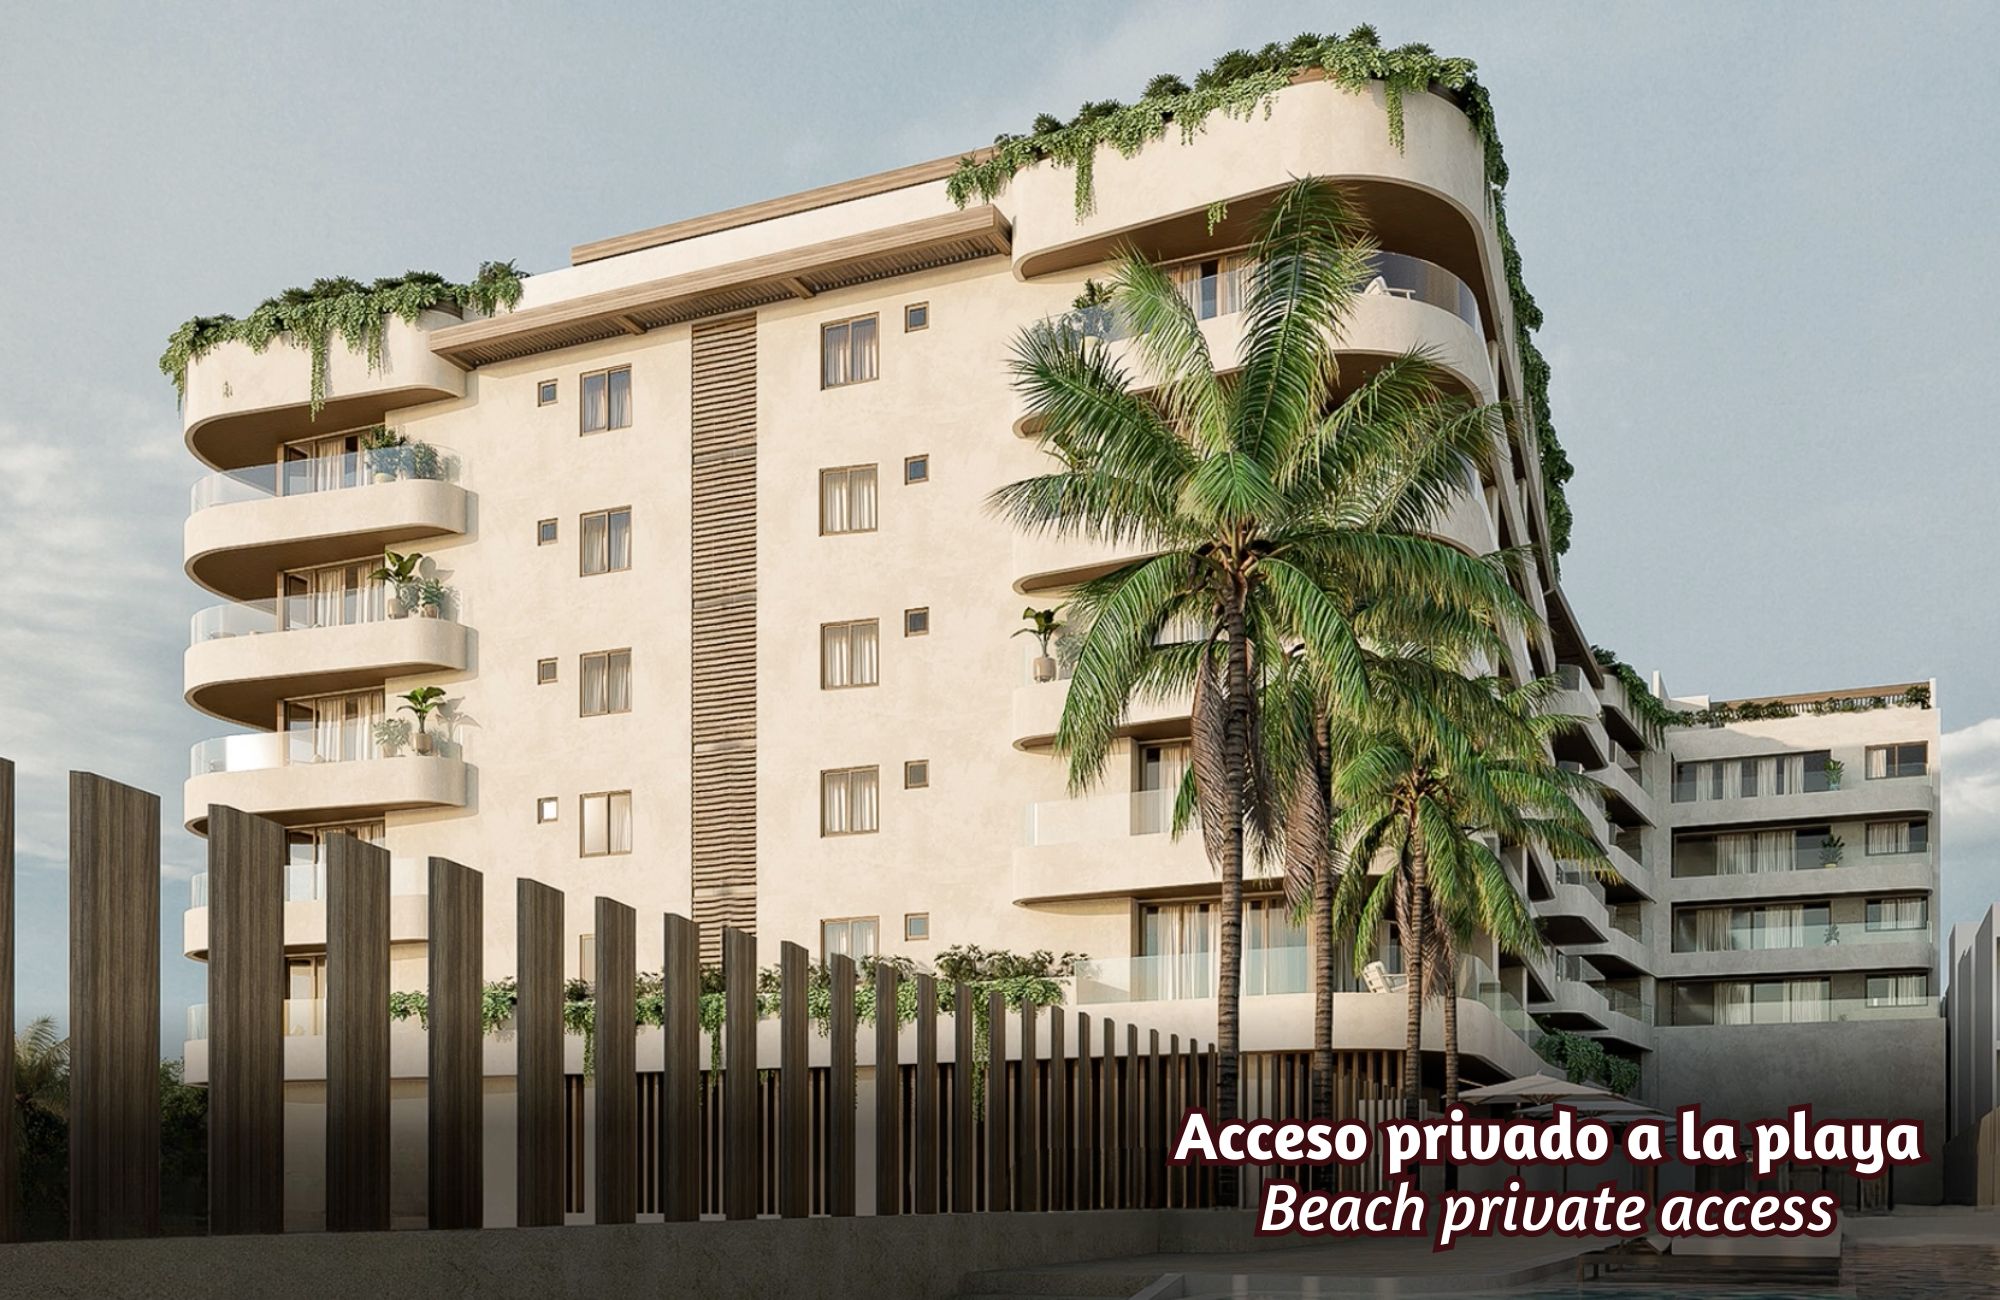 Furnished ocean view apartment with Jacuzzi, pre-construction, for sale in Puerto Morelos.